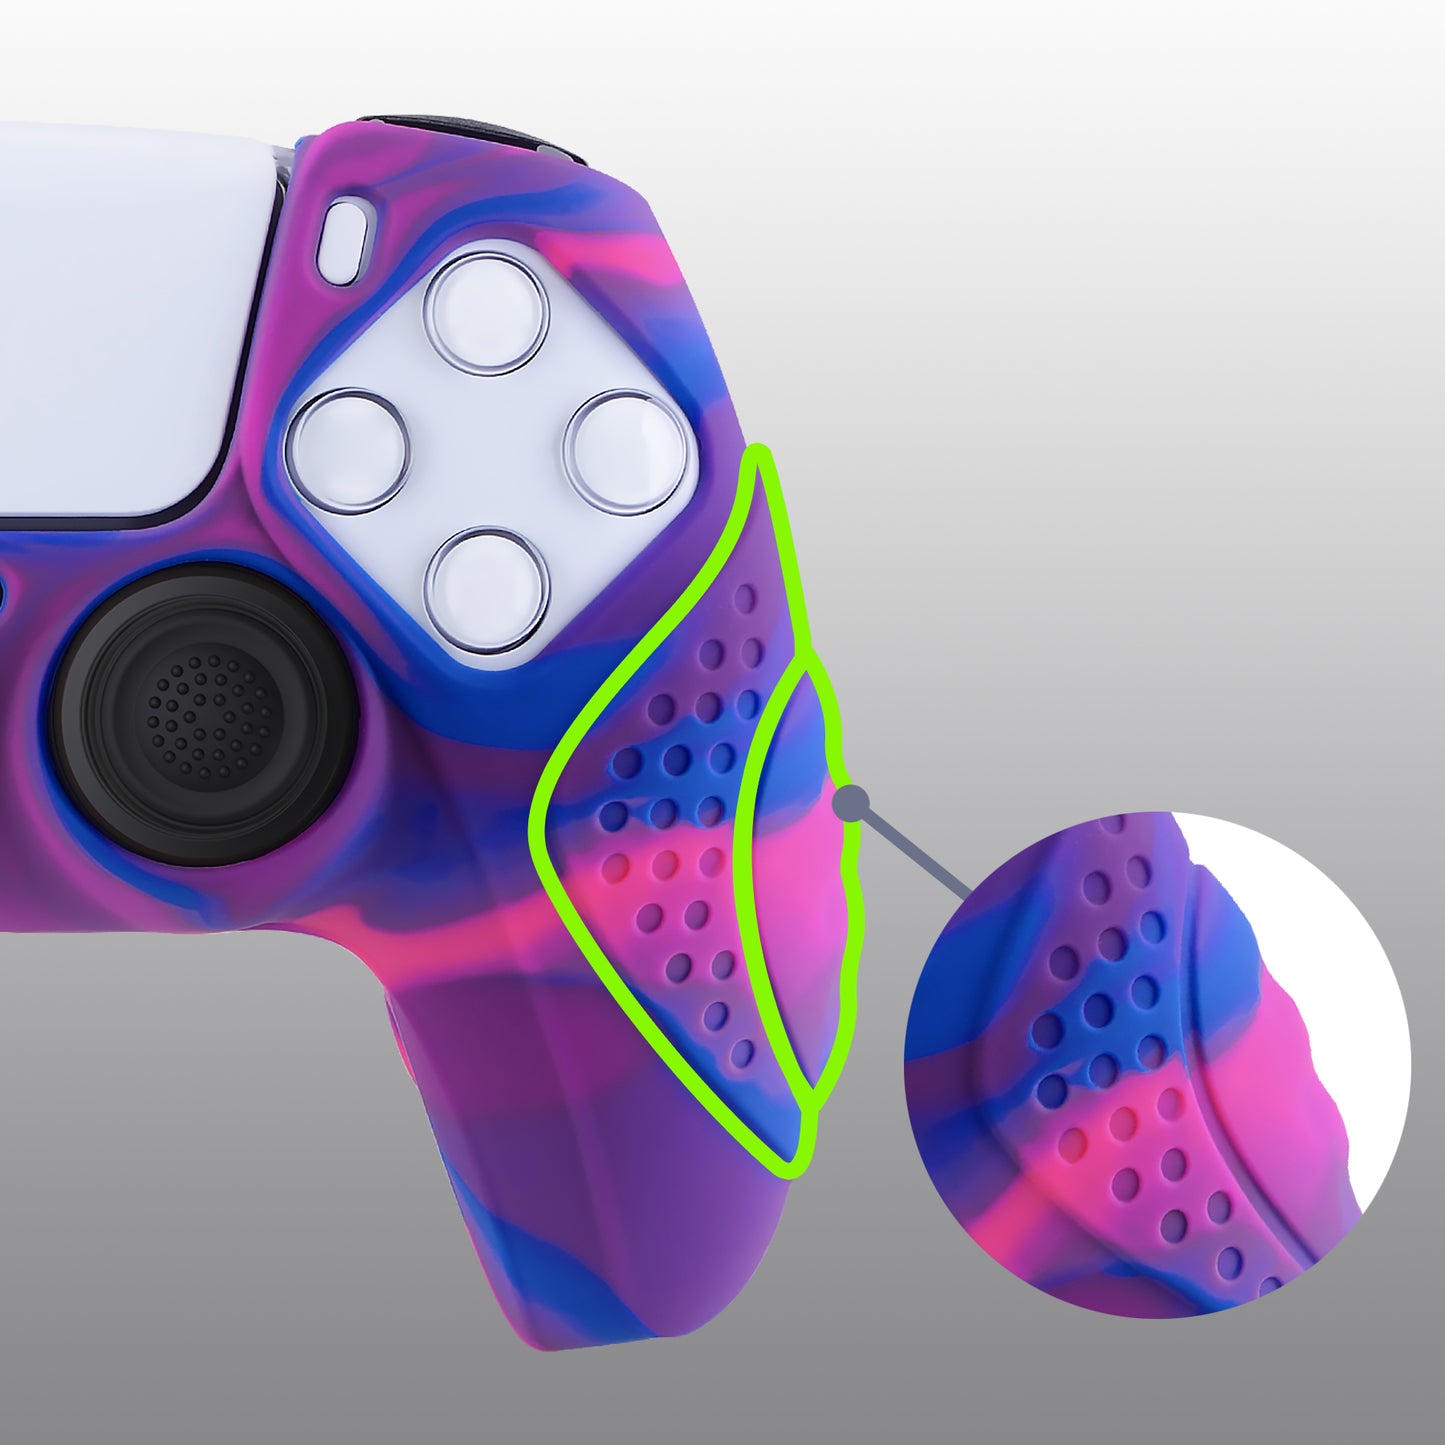 PlayVital Guardian Edition Anti-Slip Silicone Cover Skin with Thumb Grip Caps for PS5 Wireless Controller - Pink & Purple & Blue - YHPF019 PlayVital